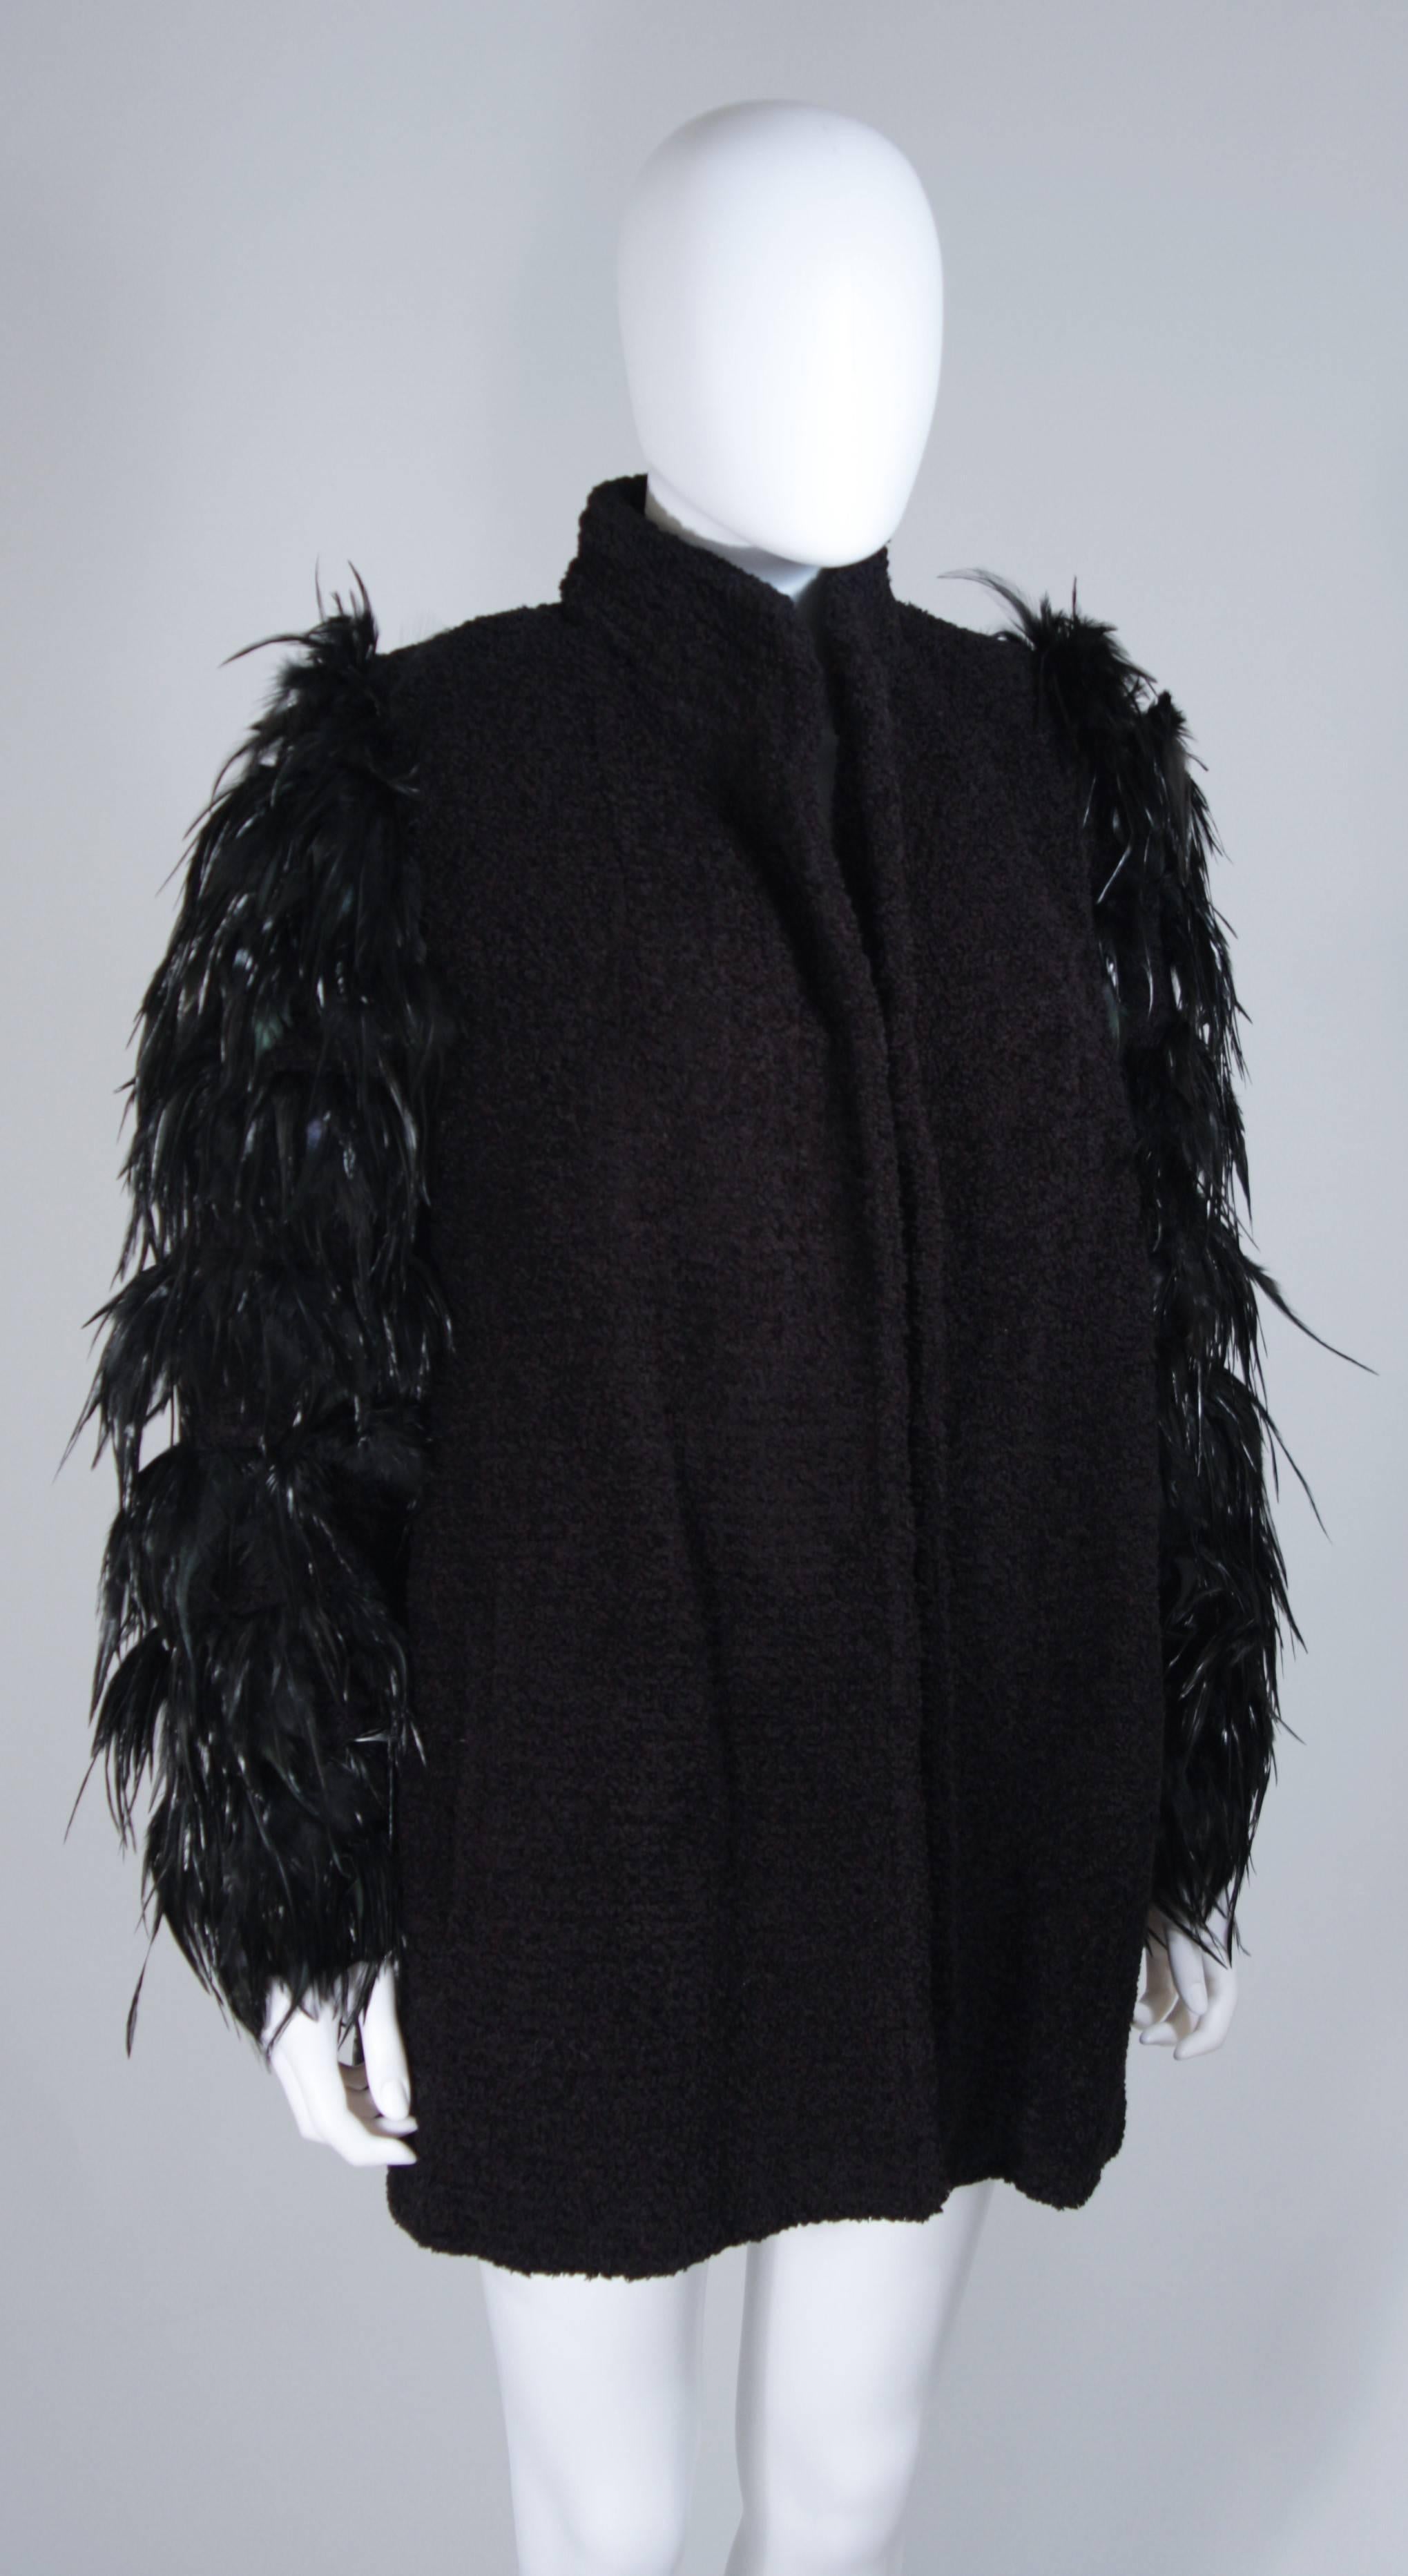 Women's TED LAPIDUS Circa 1980's Lana Wool Jacket with Feather Sleeve Details